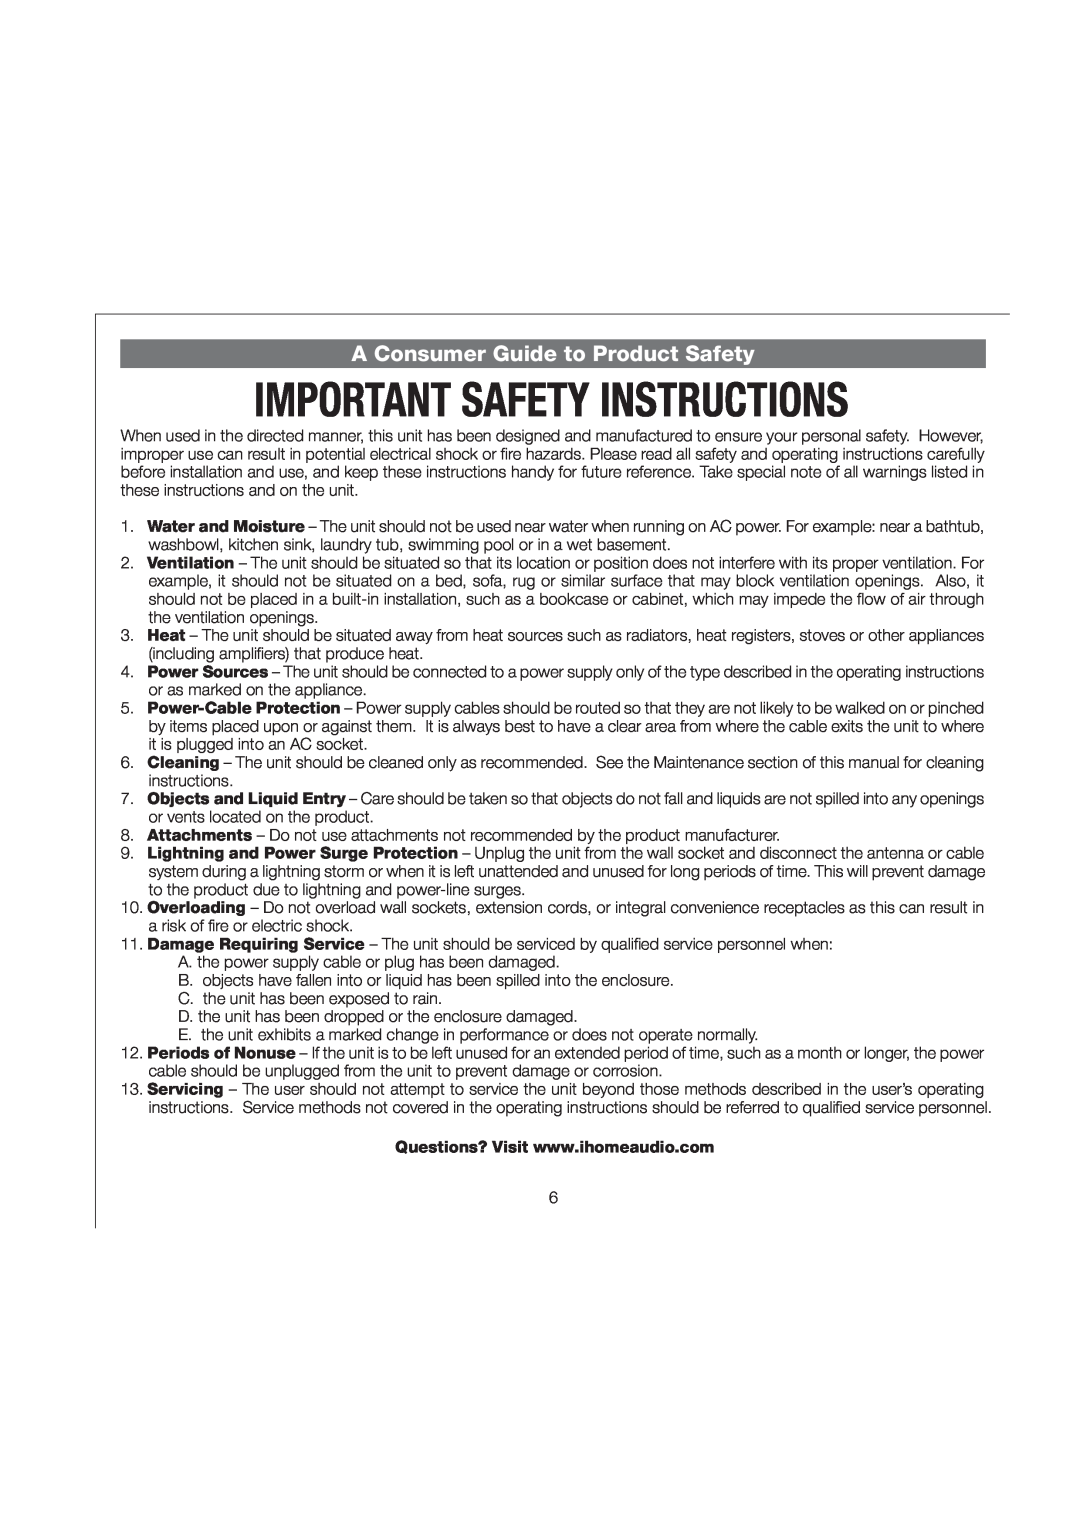 iHome iH2O, iH20 IB manual A Consumer Guide to Product Safety 